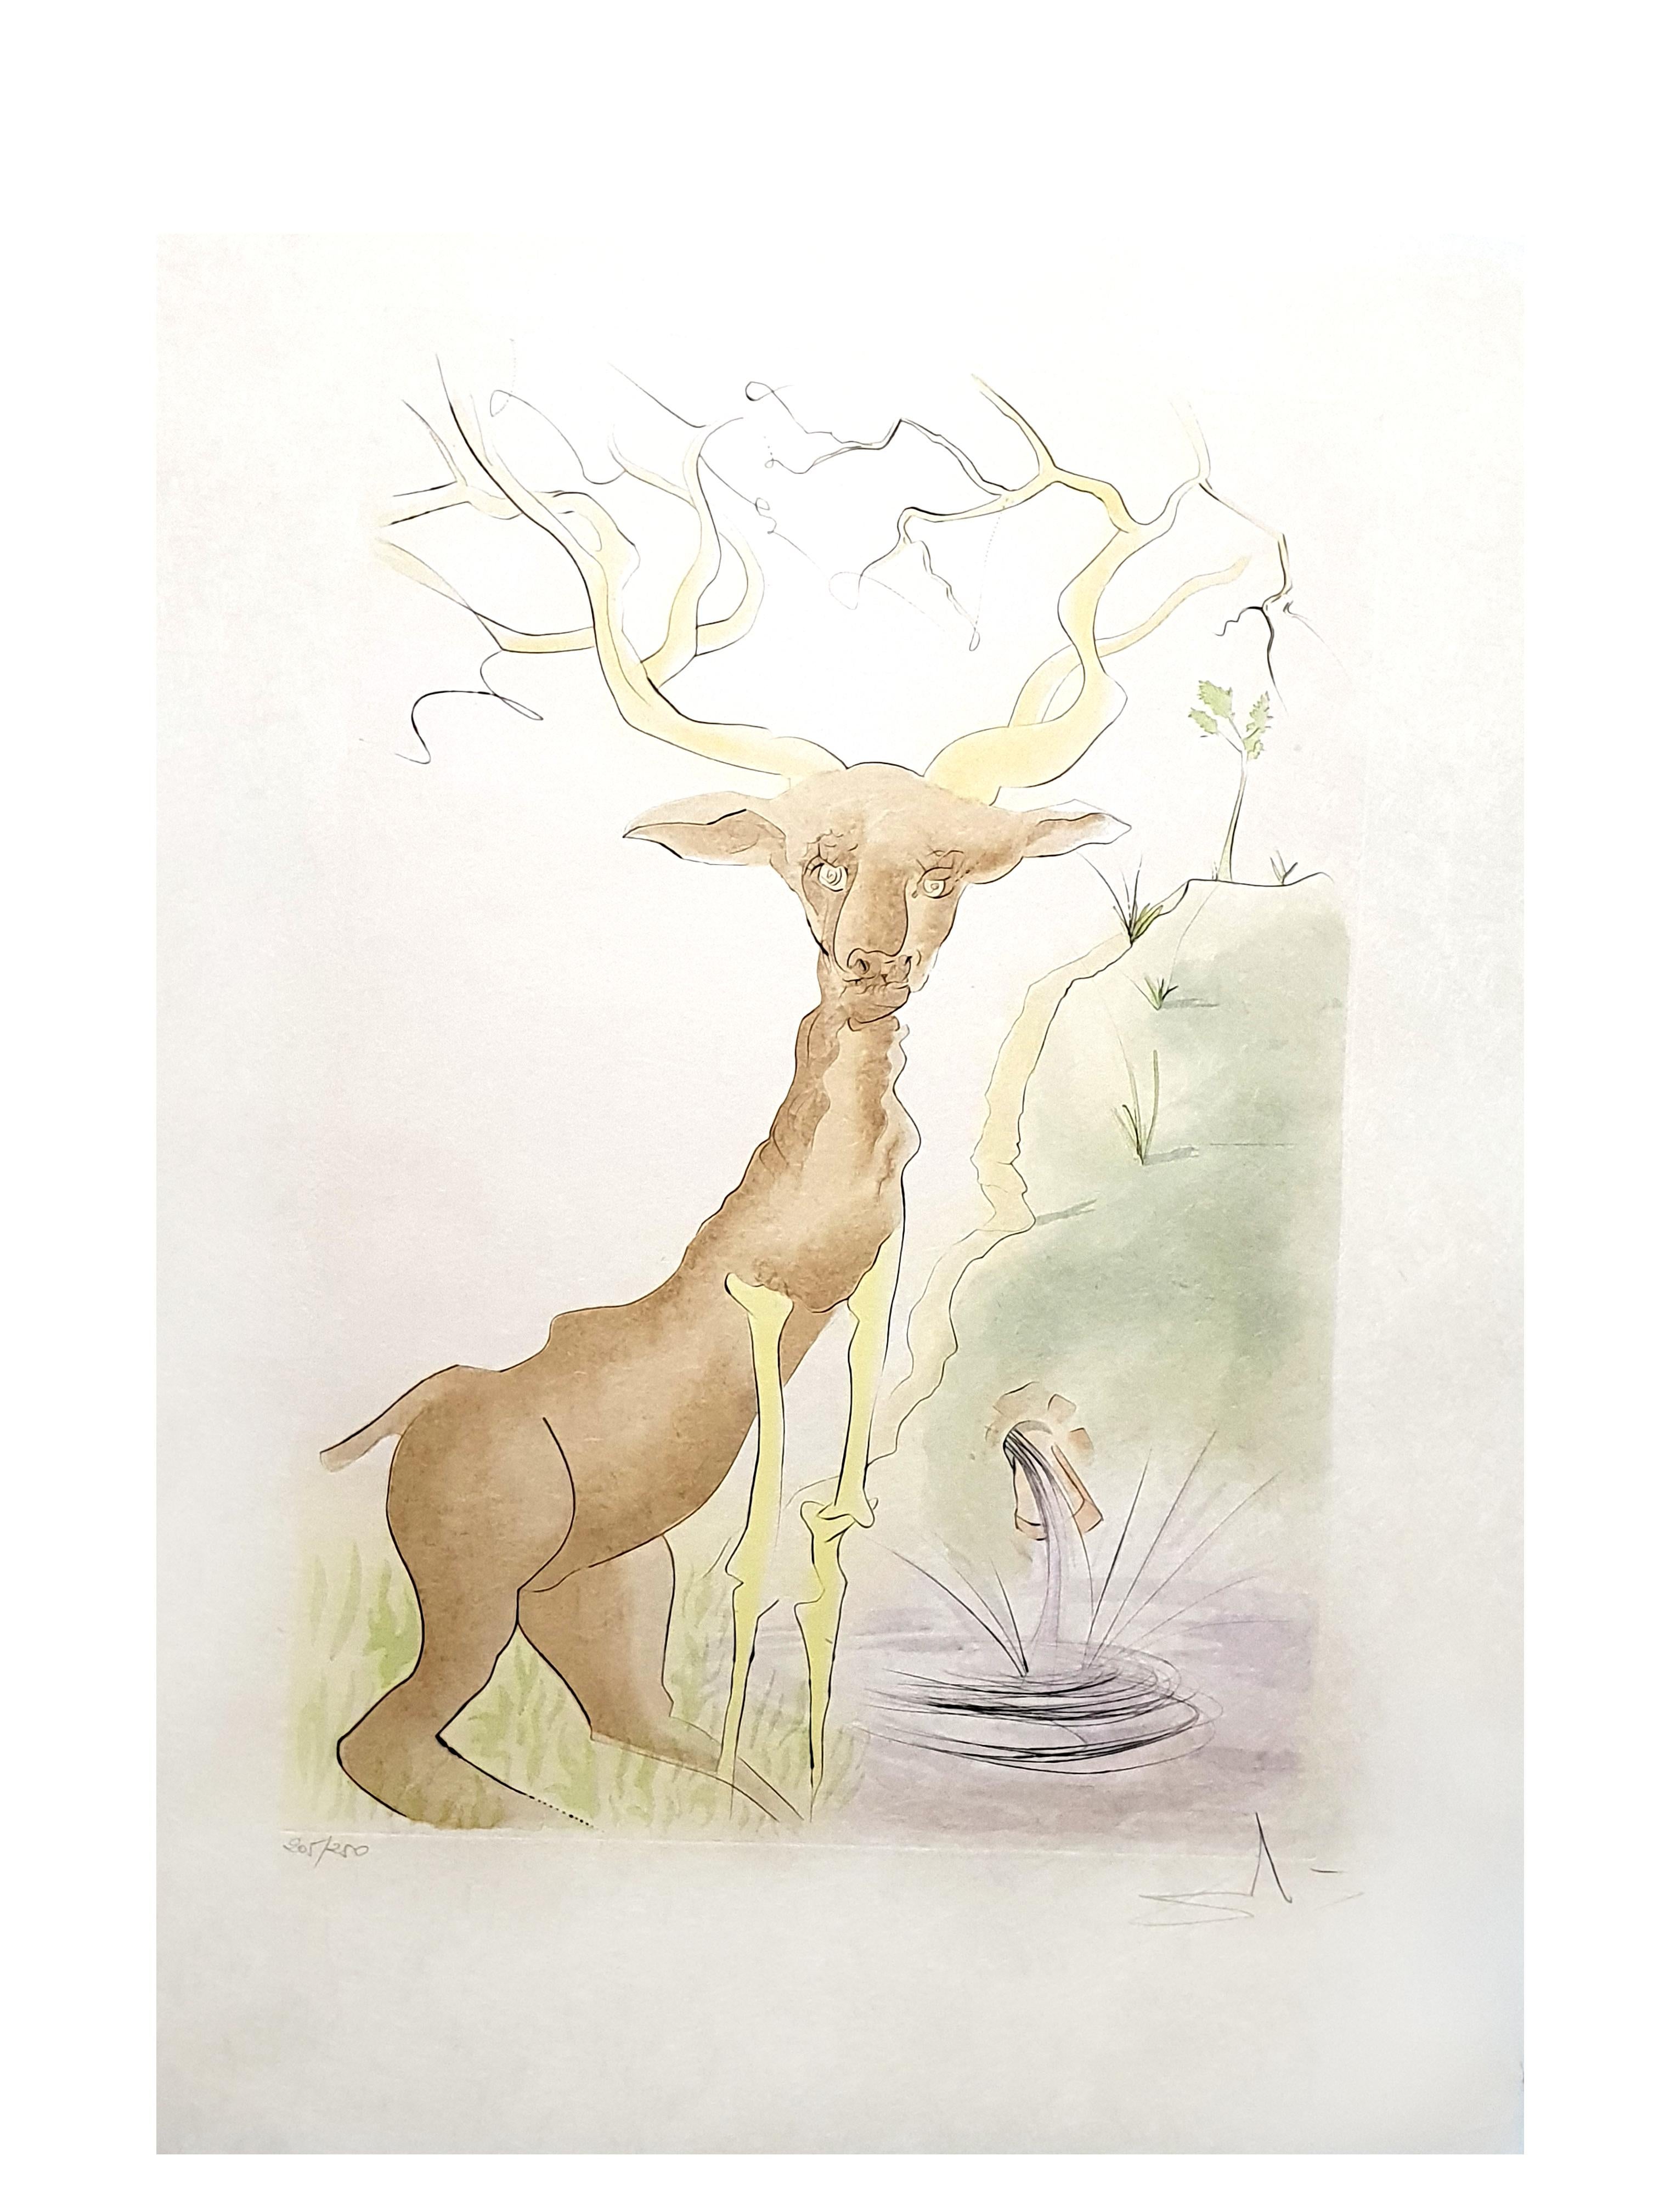 SALVADOR DALI 
Le Cerf se voyant dans l'eau from Le Bestiaire de la Fontaine
1974
Hand signed by Dali
Edition: /250
The dimensions of the image are 22.8 x 15.7 inches on 31 x 23.2 inch paper
Reference: 74-1  in 